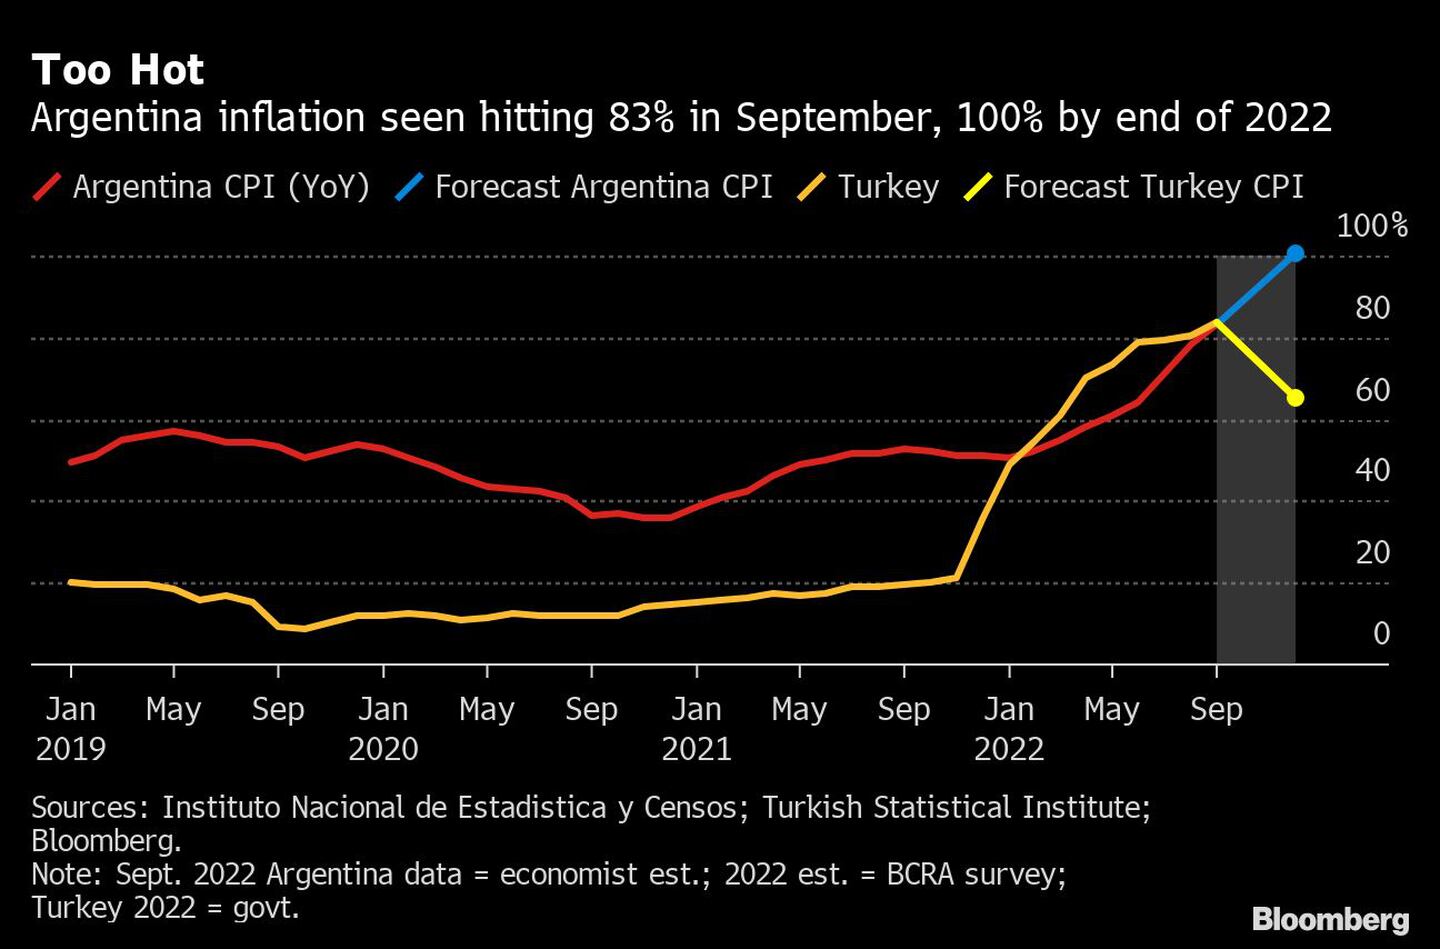 Too Hot | Argentina inflation seen hitting 83% in September, 100% by end of 2022dfd